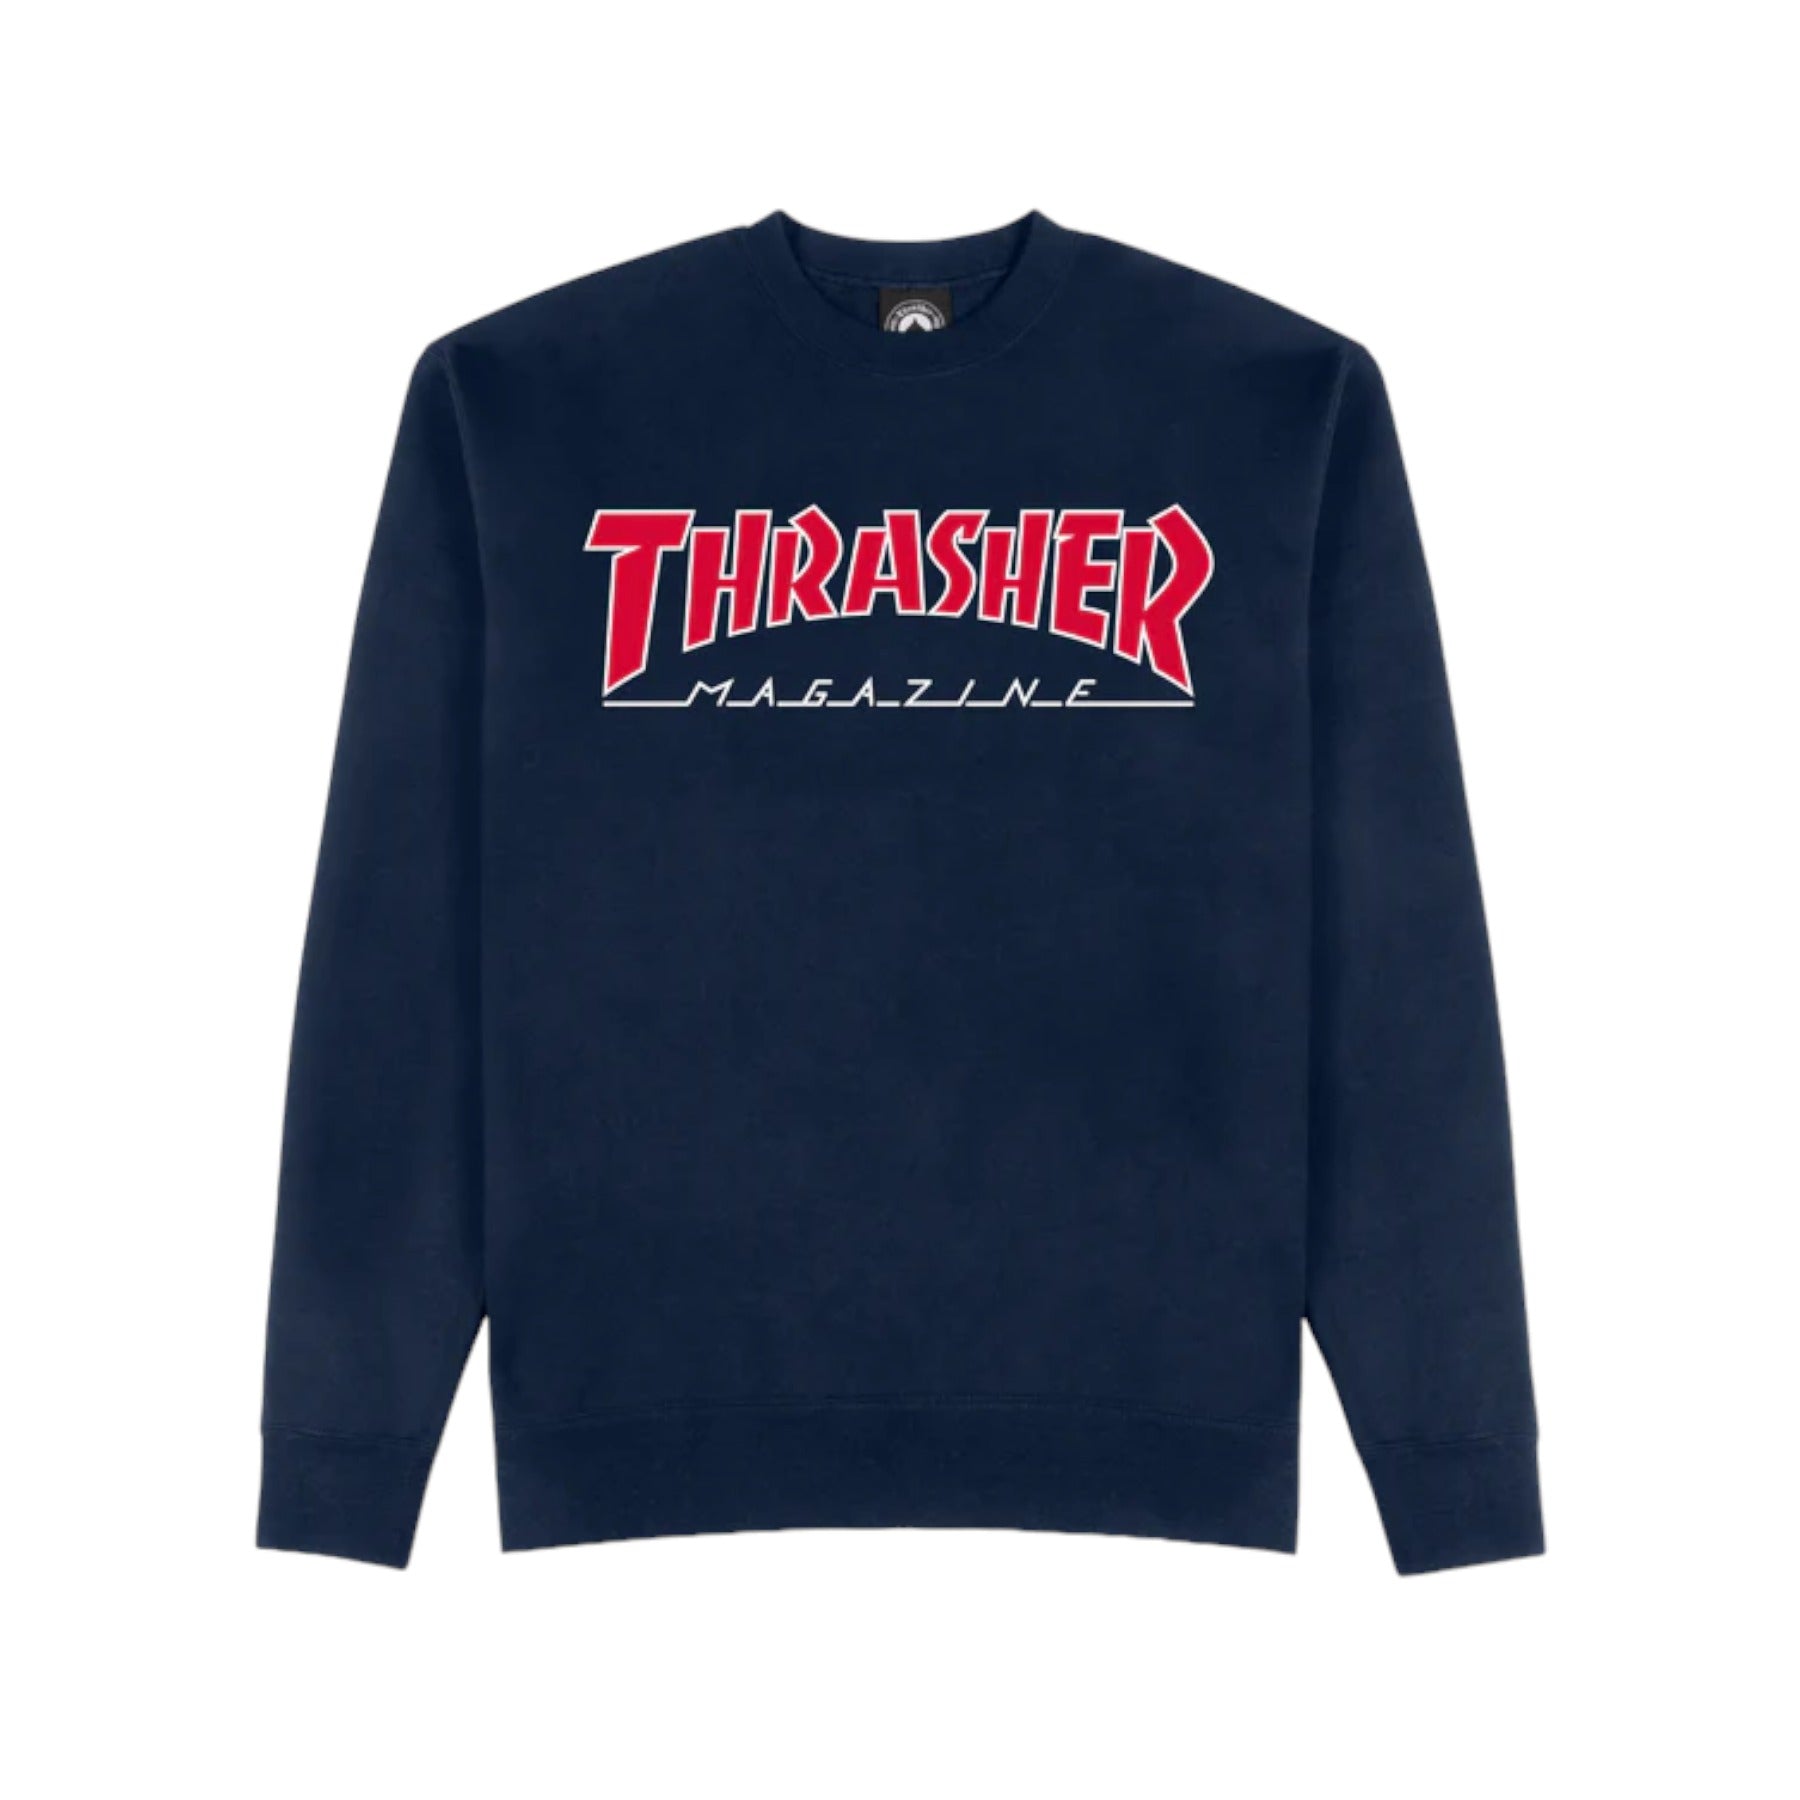 Thrasher Outlined Crewneck - Navy/Red